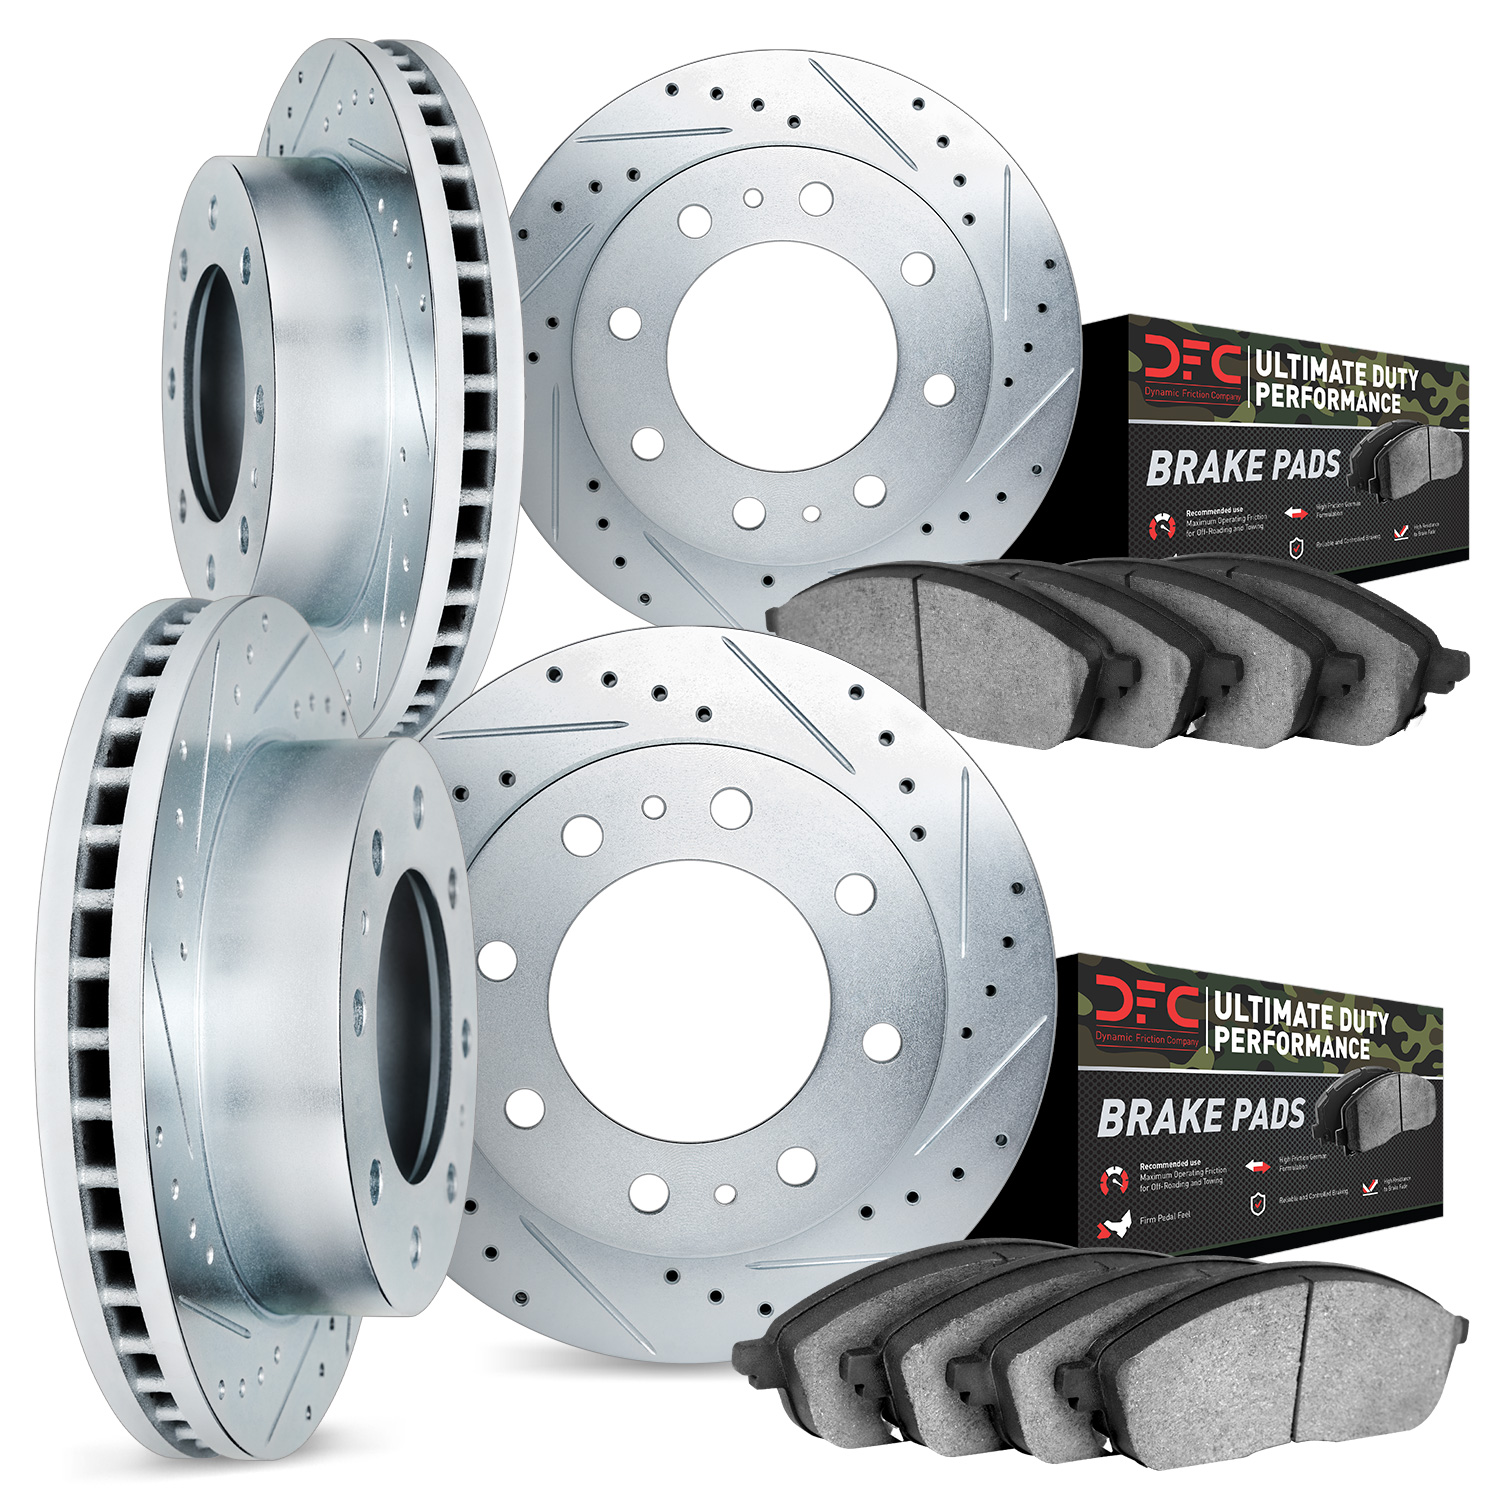 7404-48011 Drilled/Slotted Brake Rotors with Ultimate-Duty Brake Pads Kit [Silver], 2001-2010 GM, Position: Front and Rear